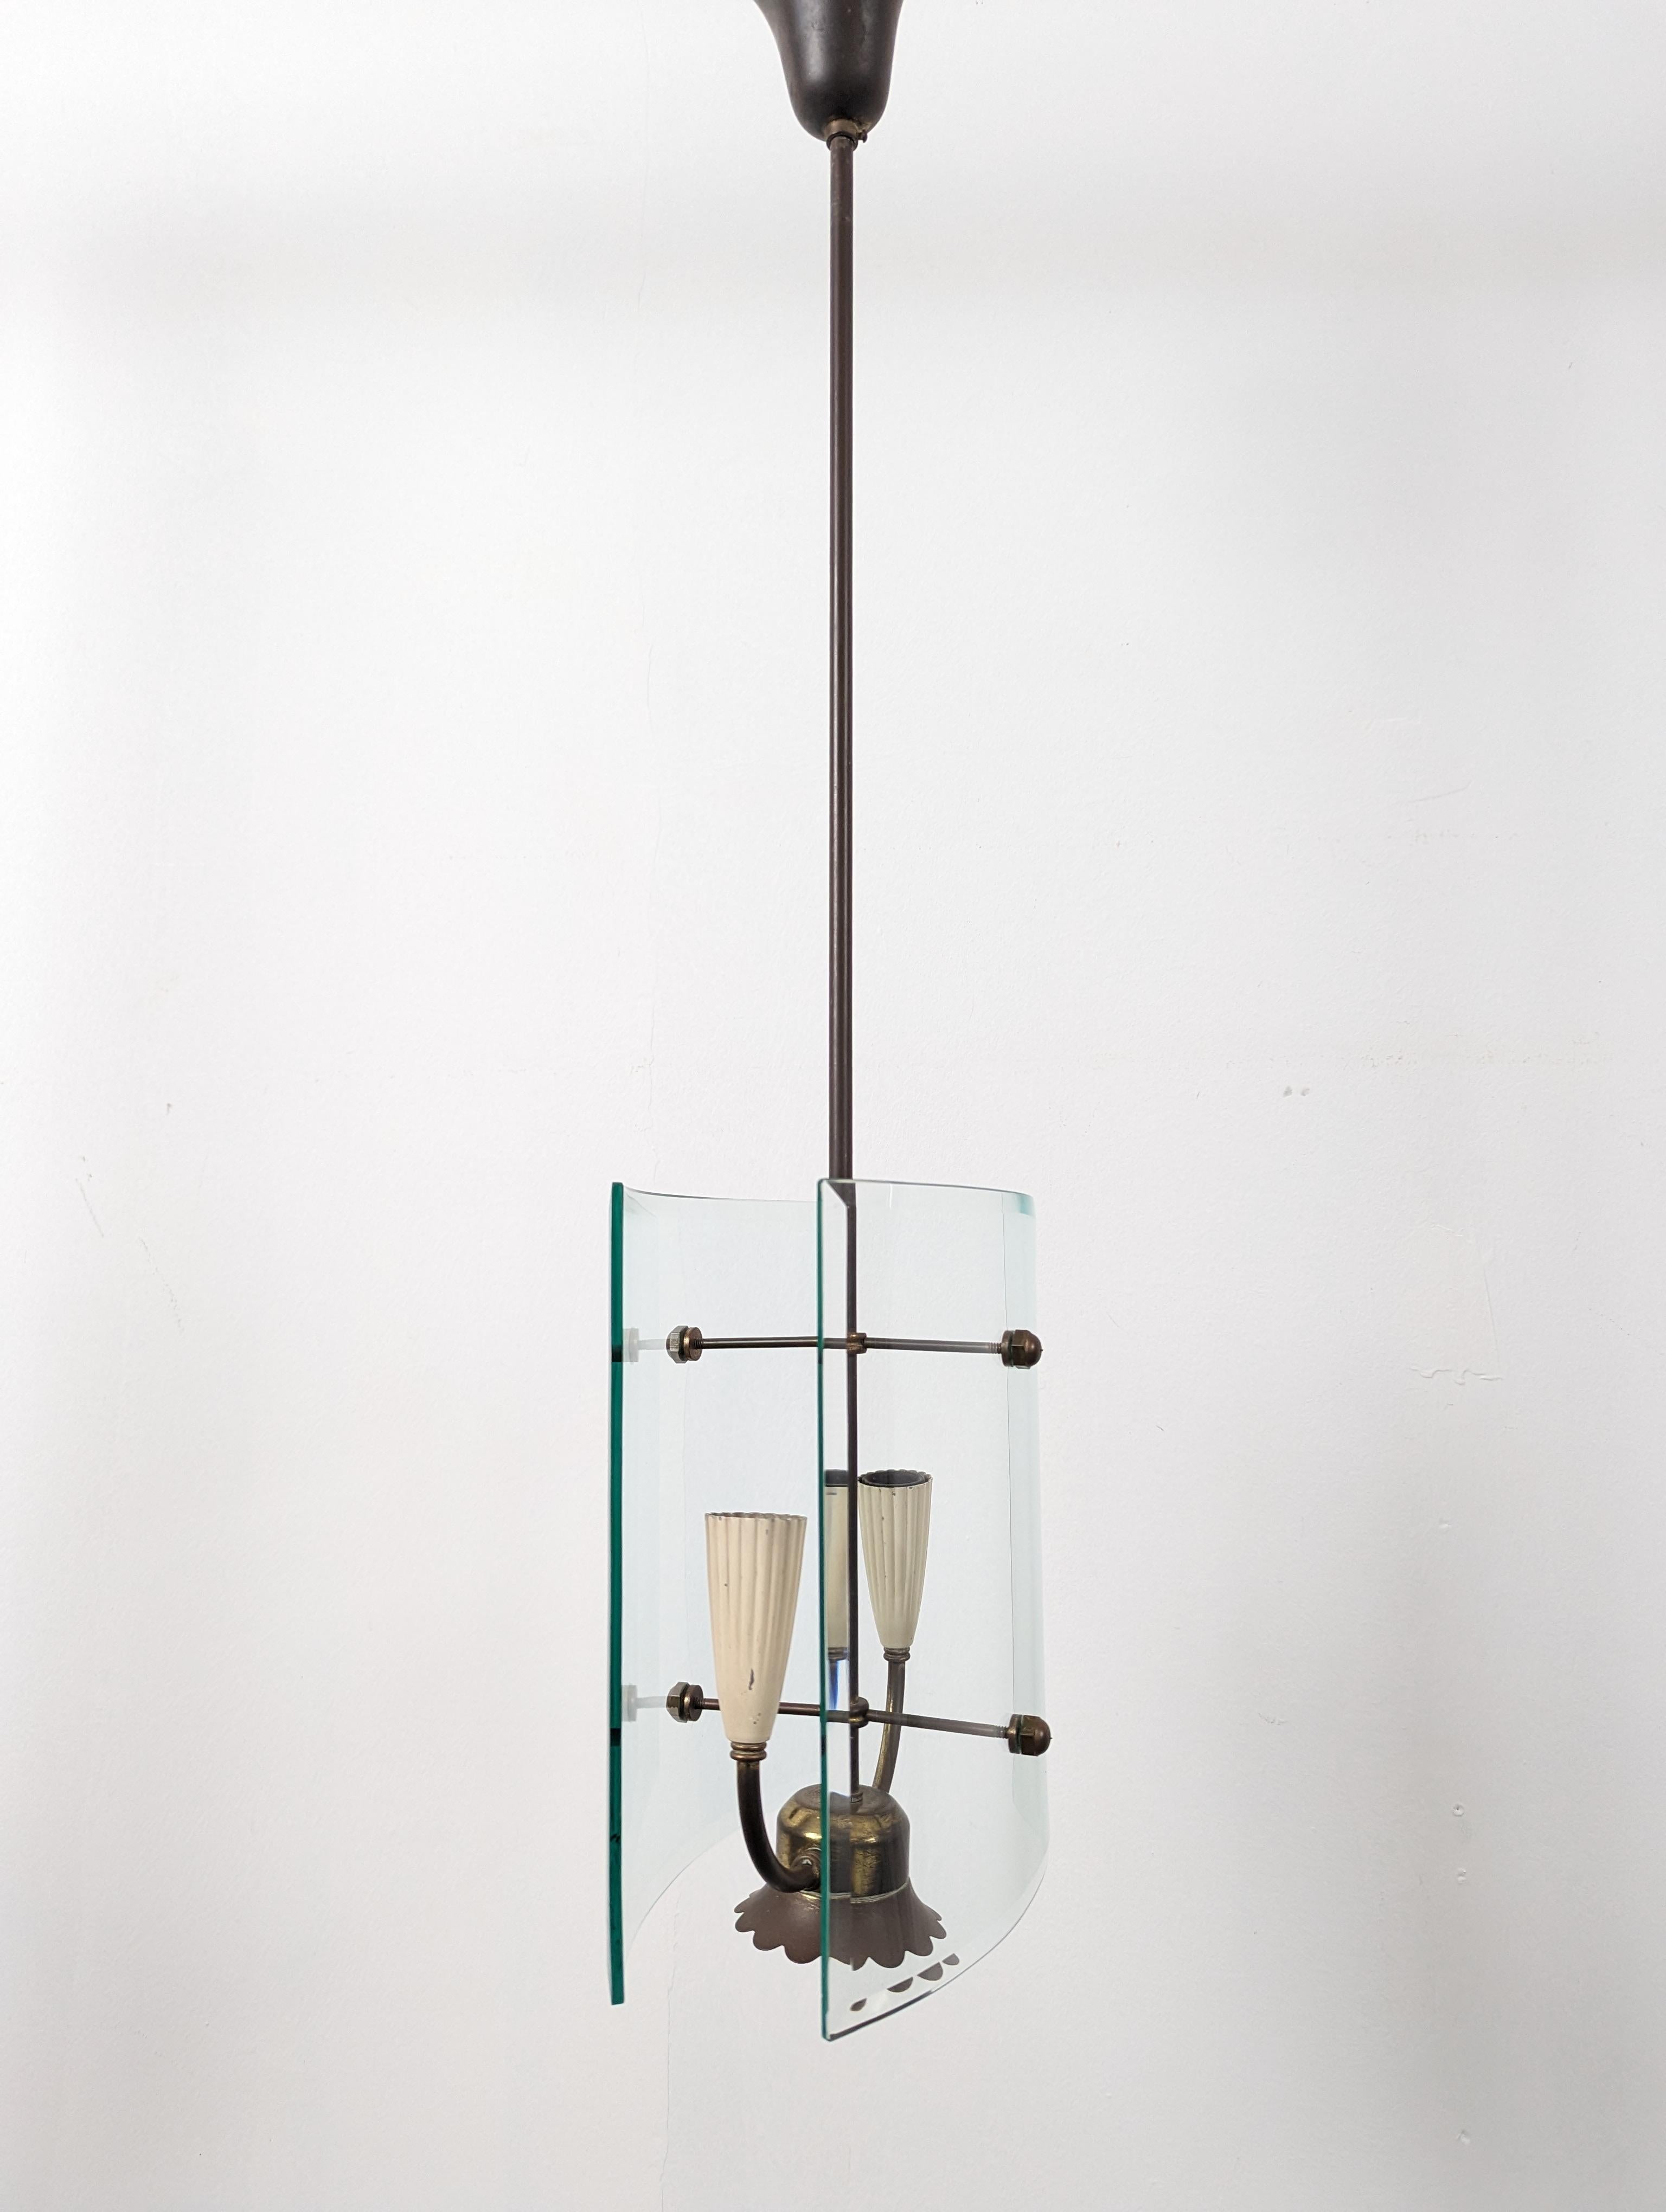 Italian Midcentury Design Light by Pietro Chiesa for Fontana Arte, 1940 In Fair Condition For Sale In Benalmadena, ES